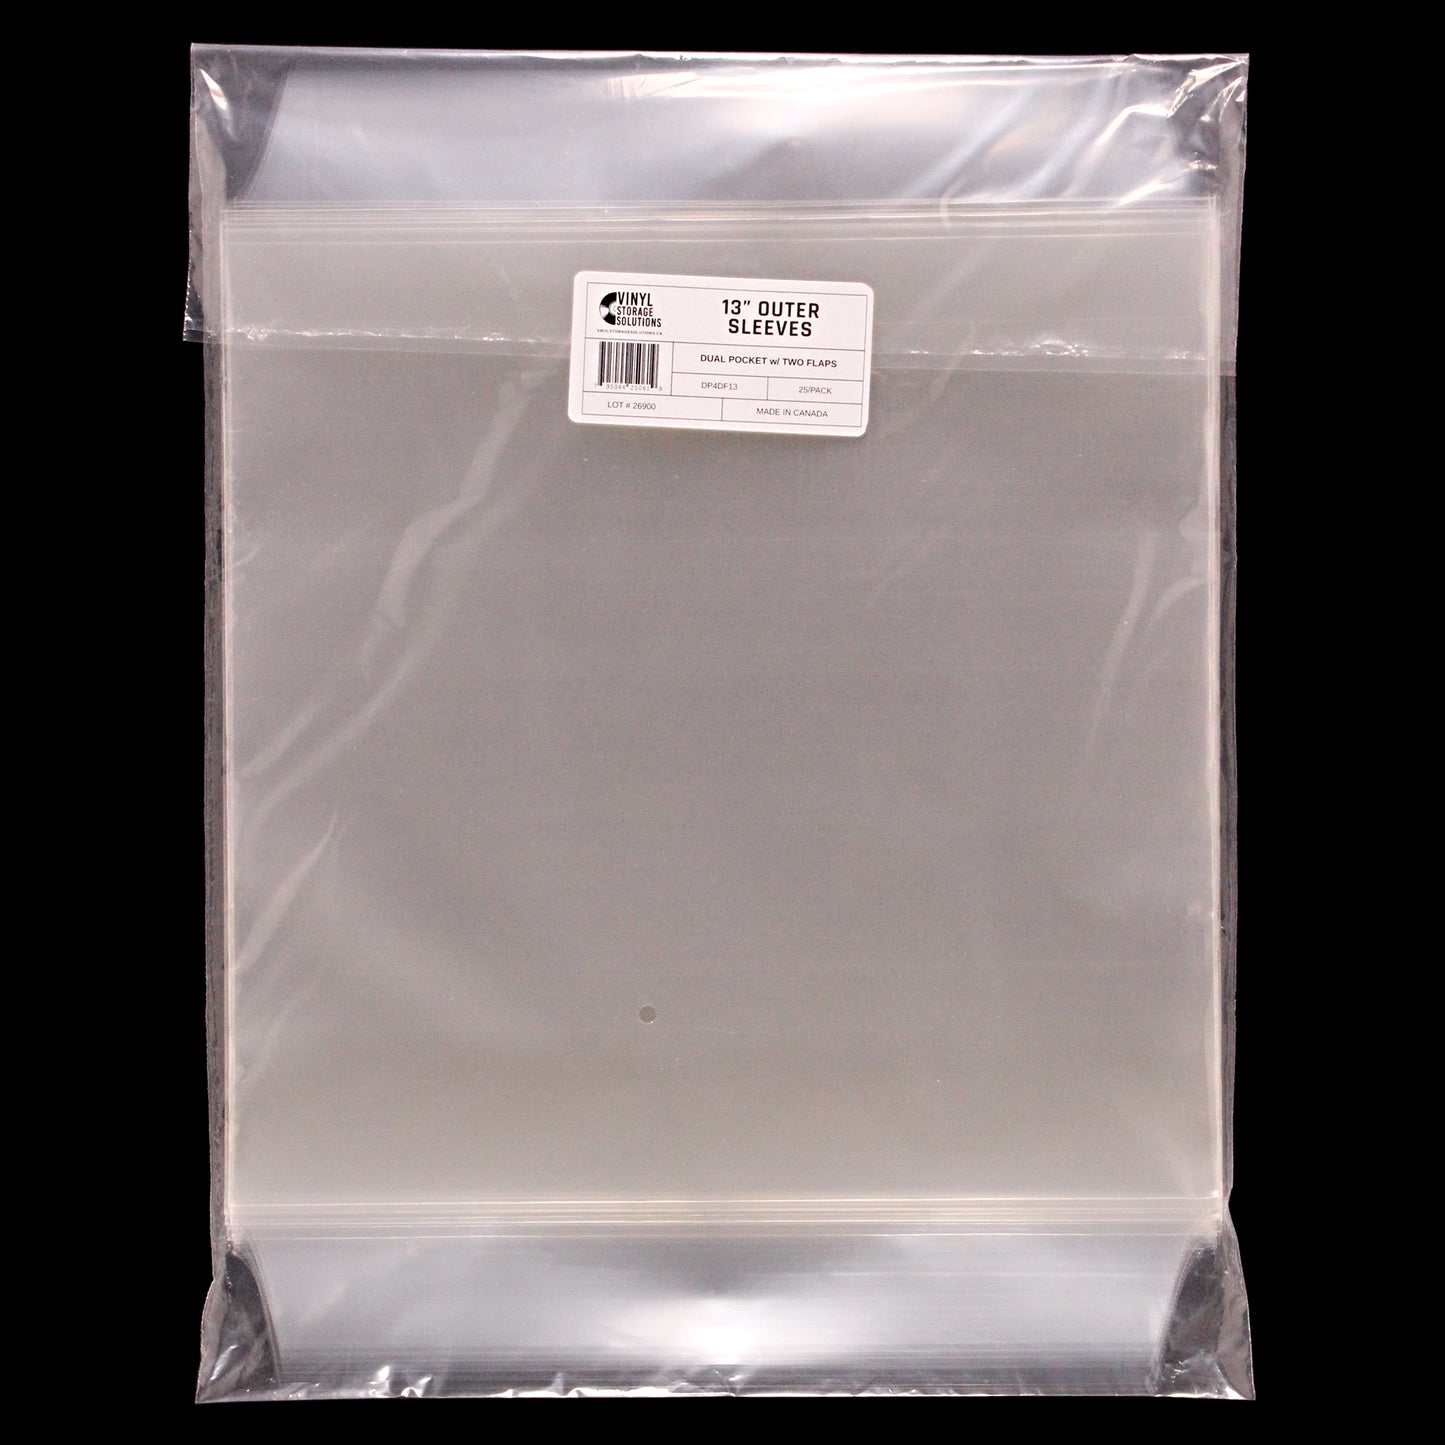 13" Dual Pocket Outer Sleeves w/ Two Flaps - 4mil (25 pack) - Vinyl Storage Solutions